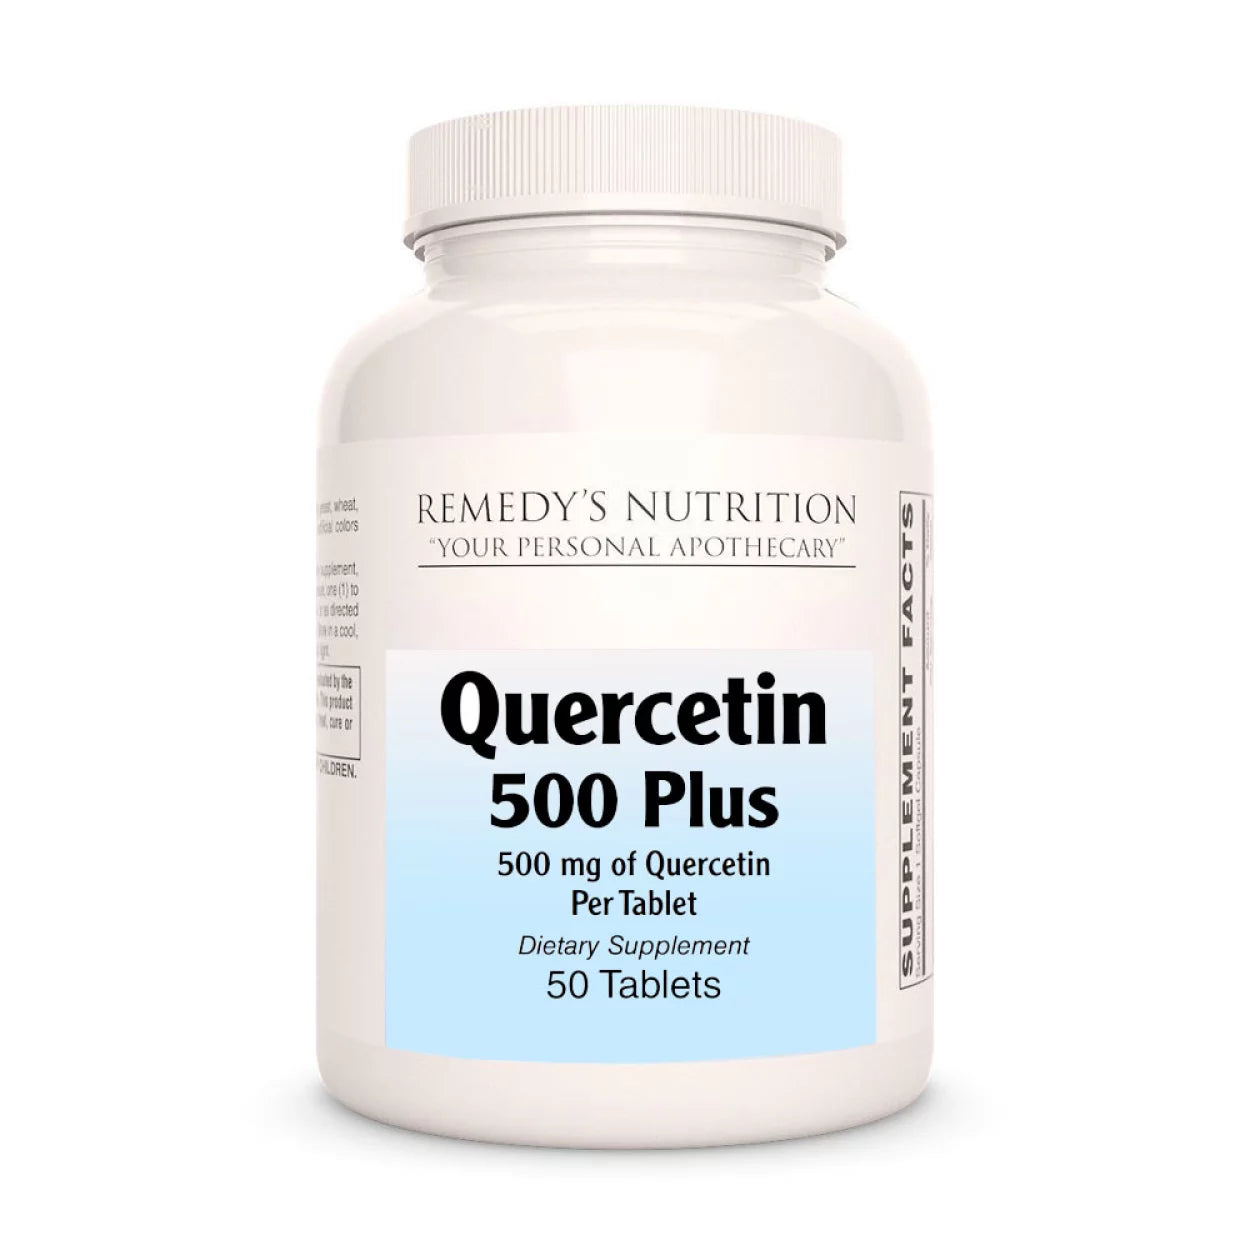 Image of Remedy's Nutrition® Quercetin Tablets Dietary Supplement front bottle. Pure, No Fillers.  50 Tablets